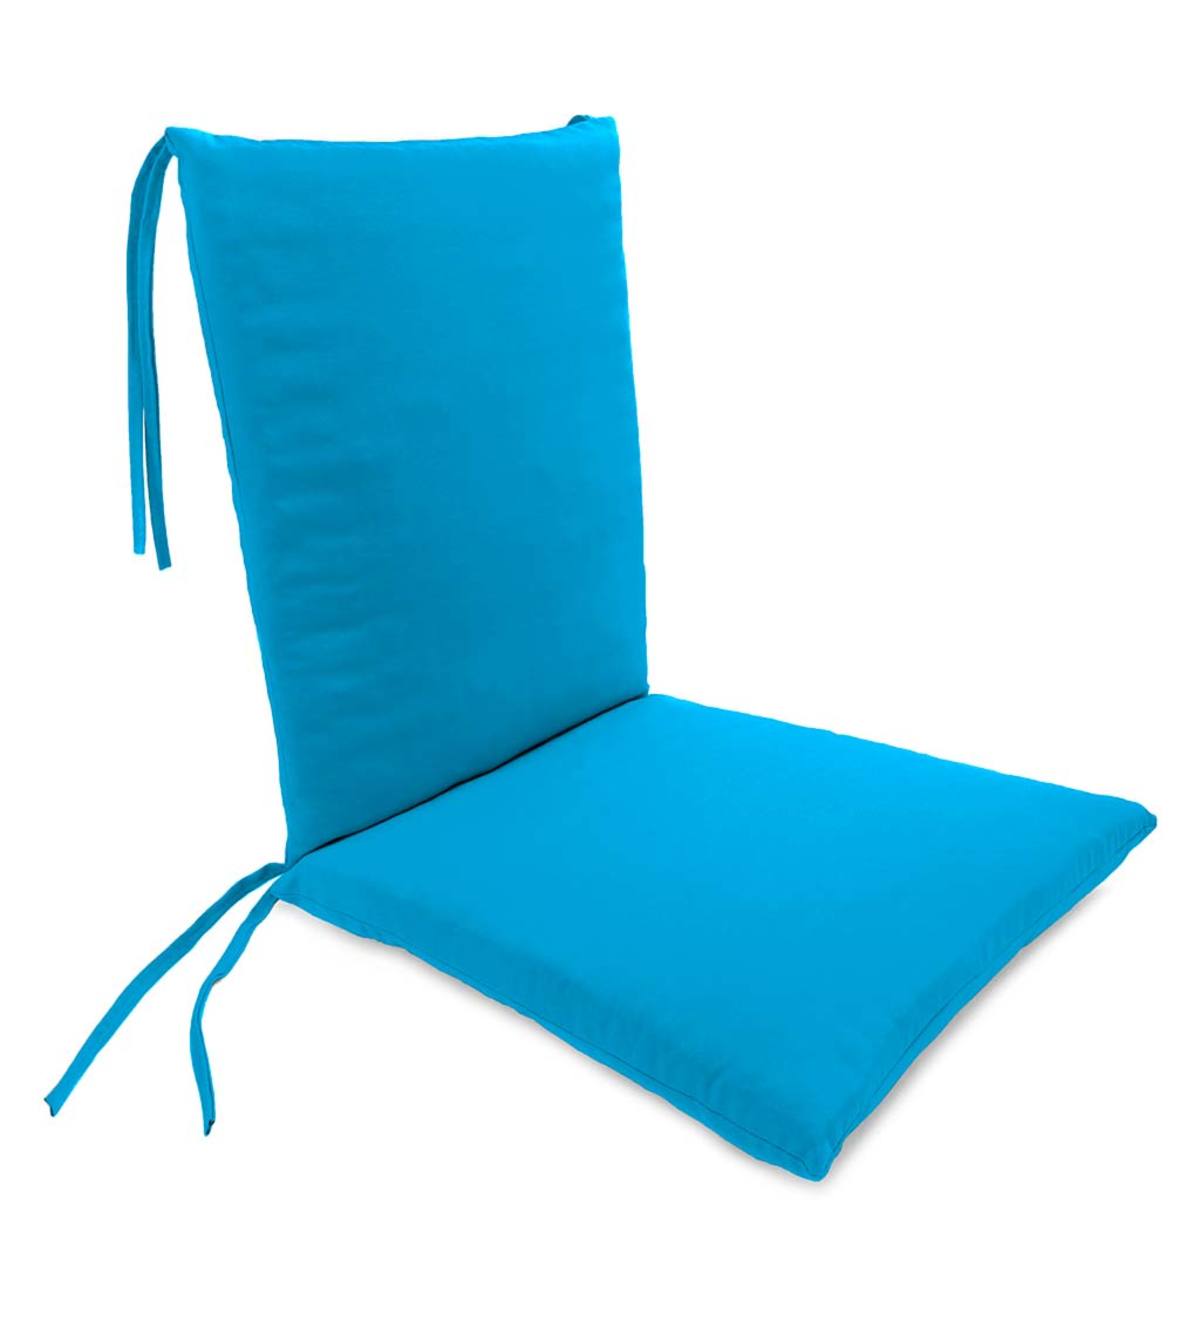 Rocking Chair Cushions, Cushions For Rocking Chairs Outdoor